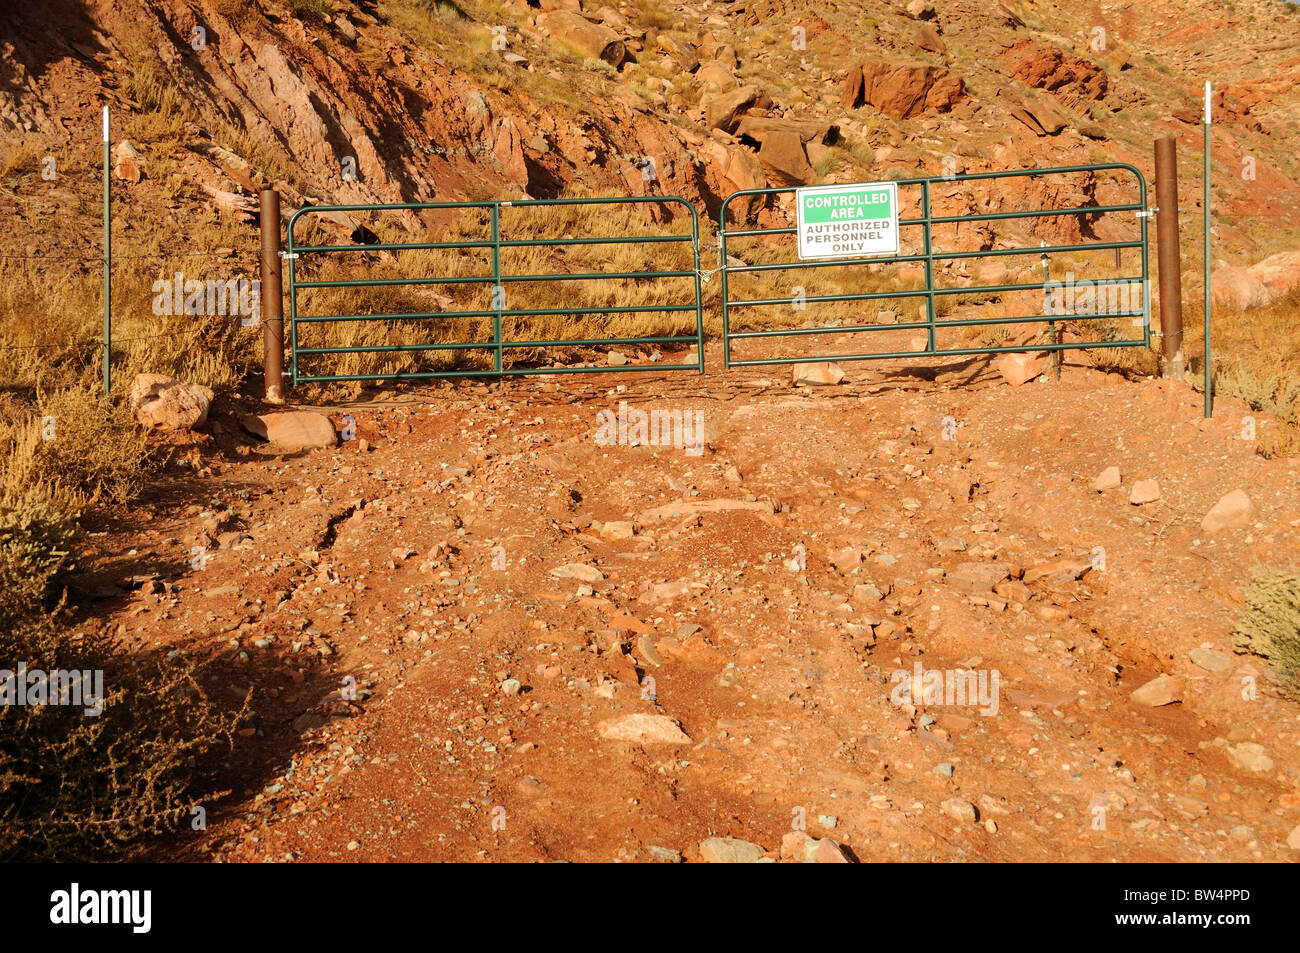 Gate with Restricted Area Notice at Uranium Mine Tailings Clean Up Site Stock Photo